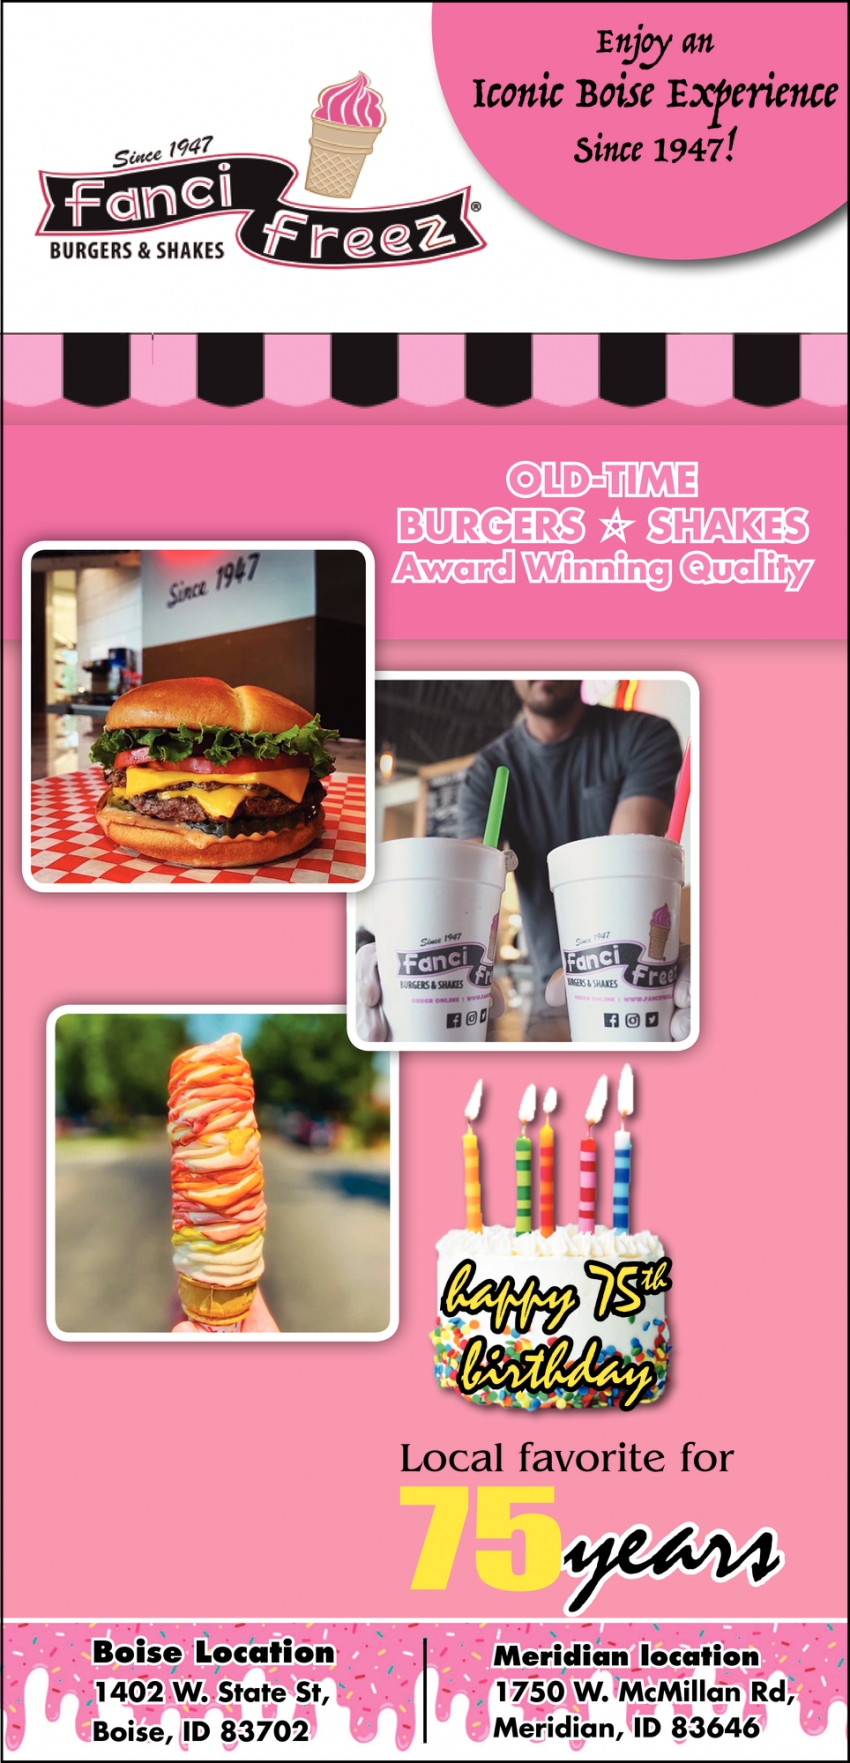 Old-Time Burgers - Shakes